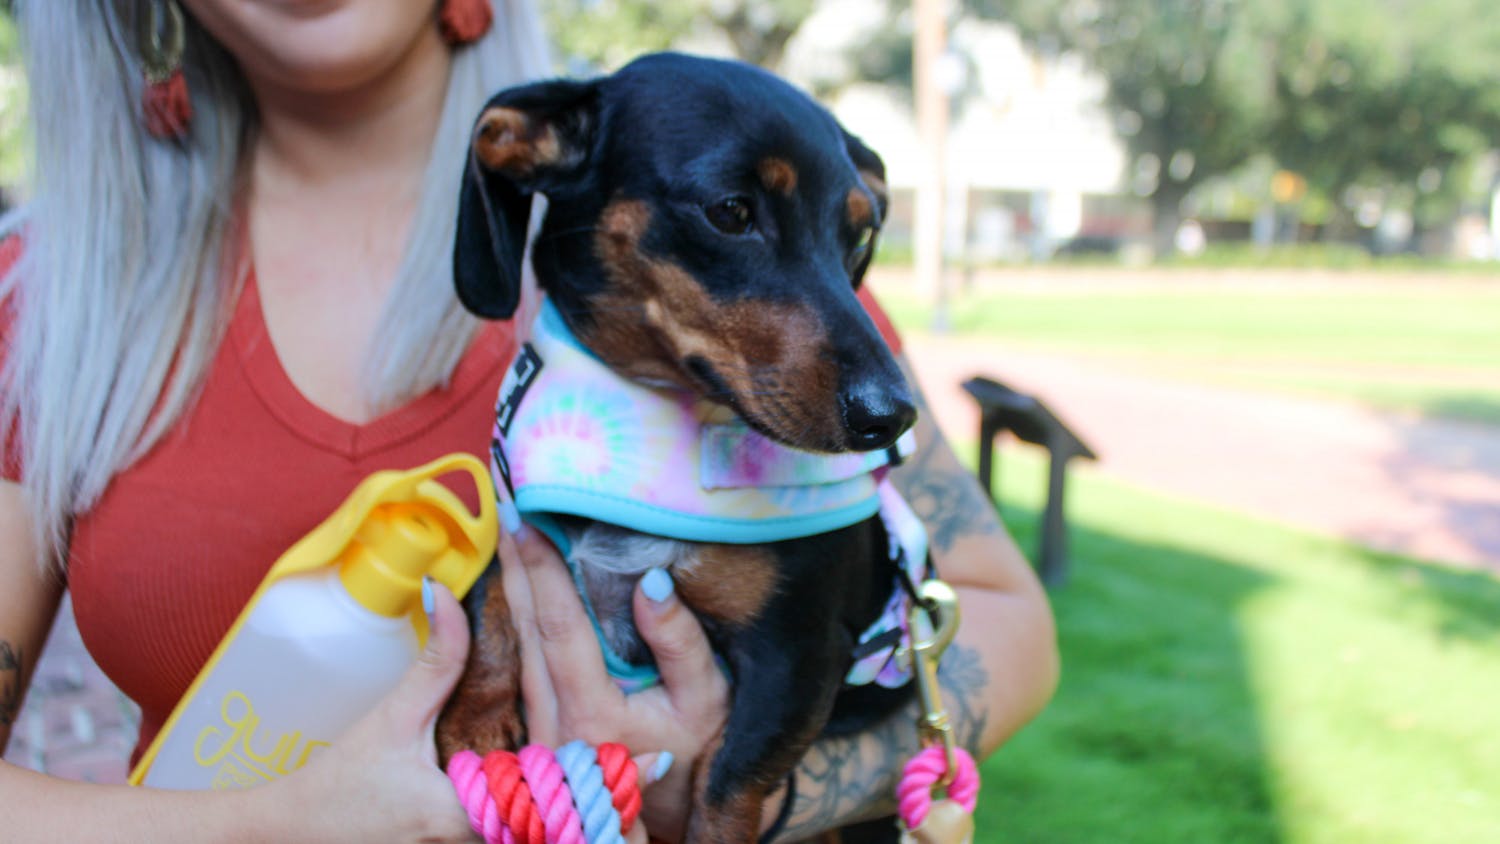 A dog walk participant holds their black and brown dachshund during a social event held by the community dog-walking group Dachshunds of Columbia on Sept. 17, 2022. The group gathered with their furry friends for a walk through USC's Horseshoe on Saturday morning.